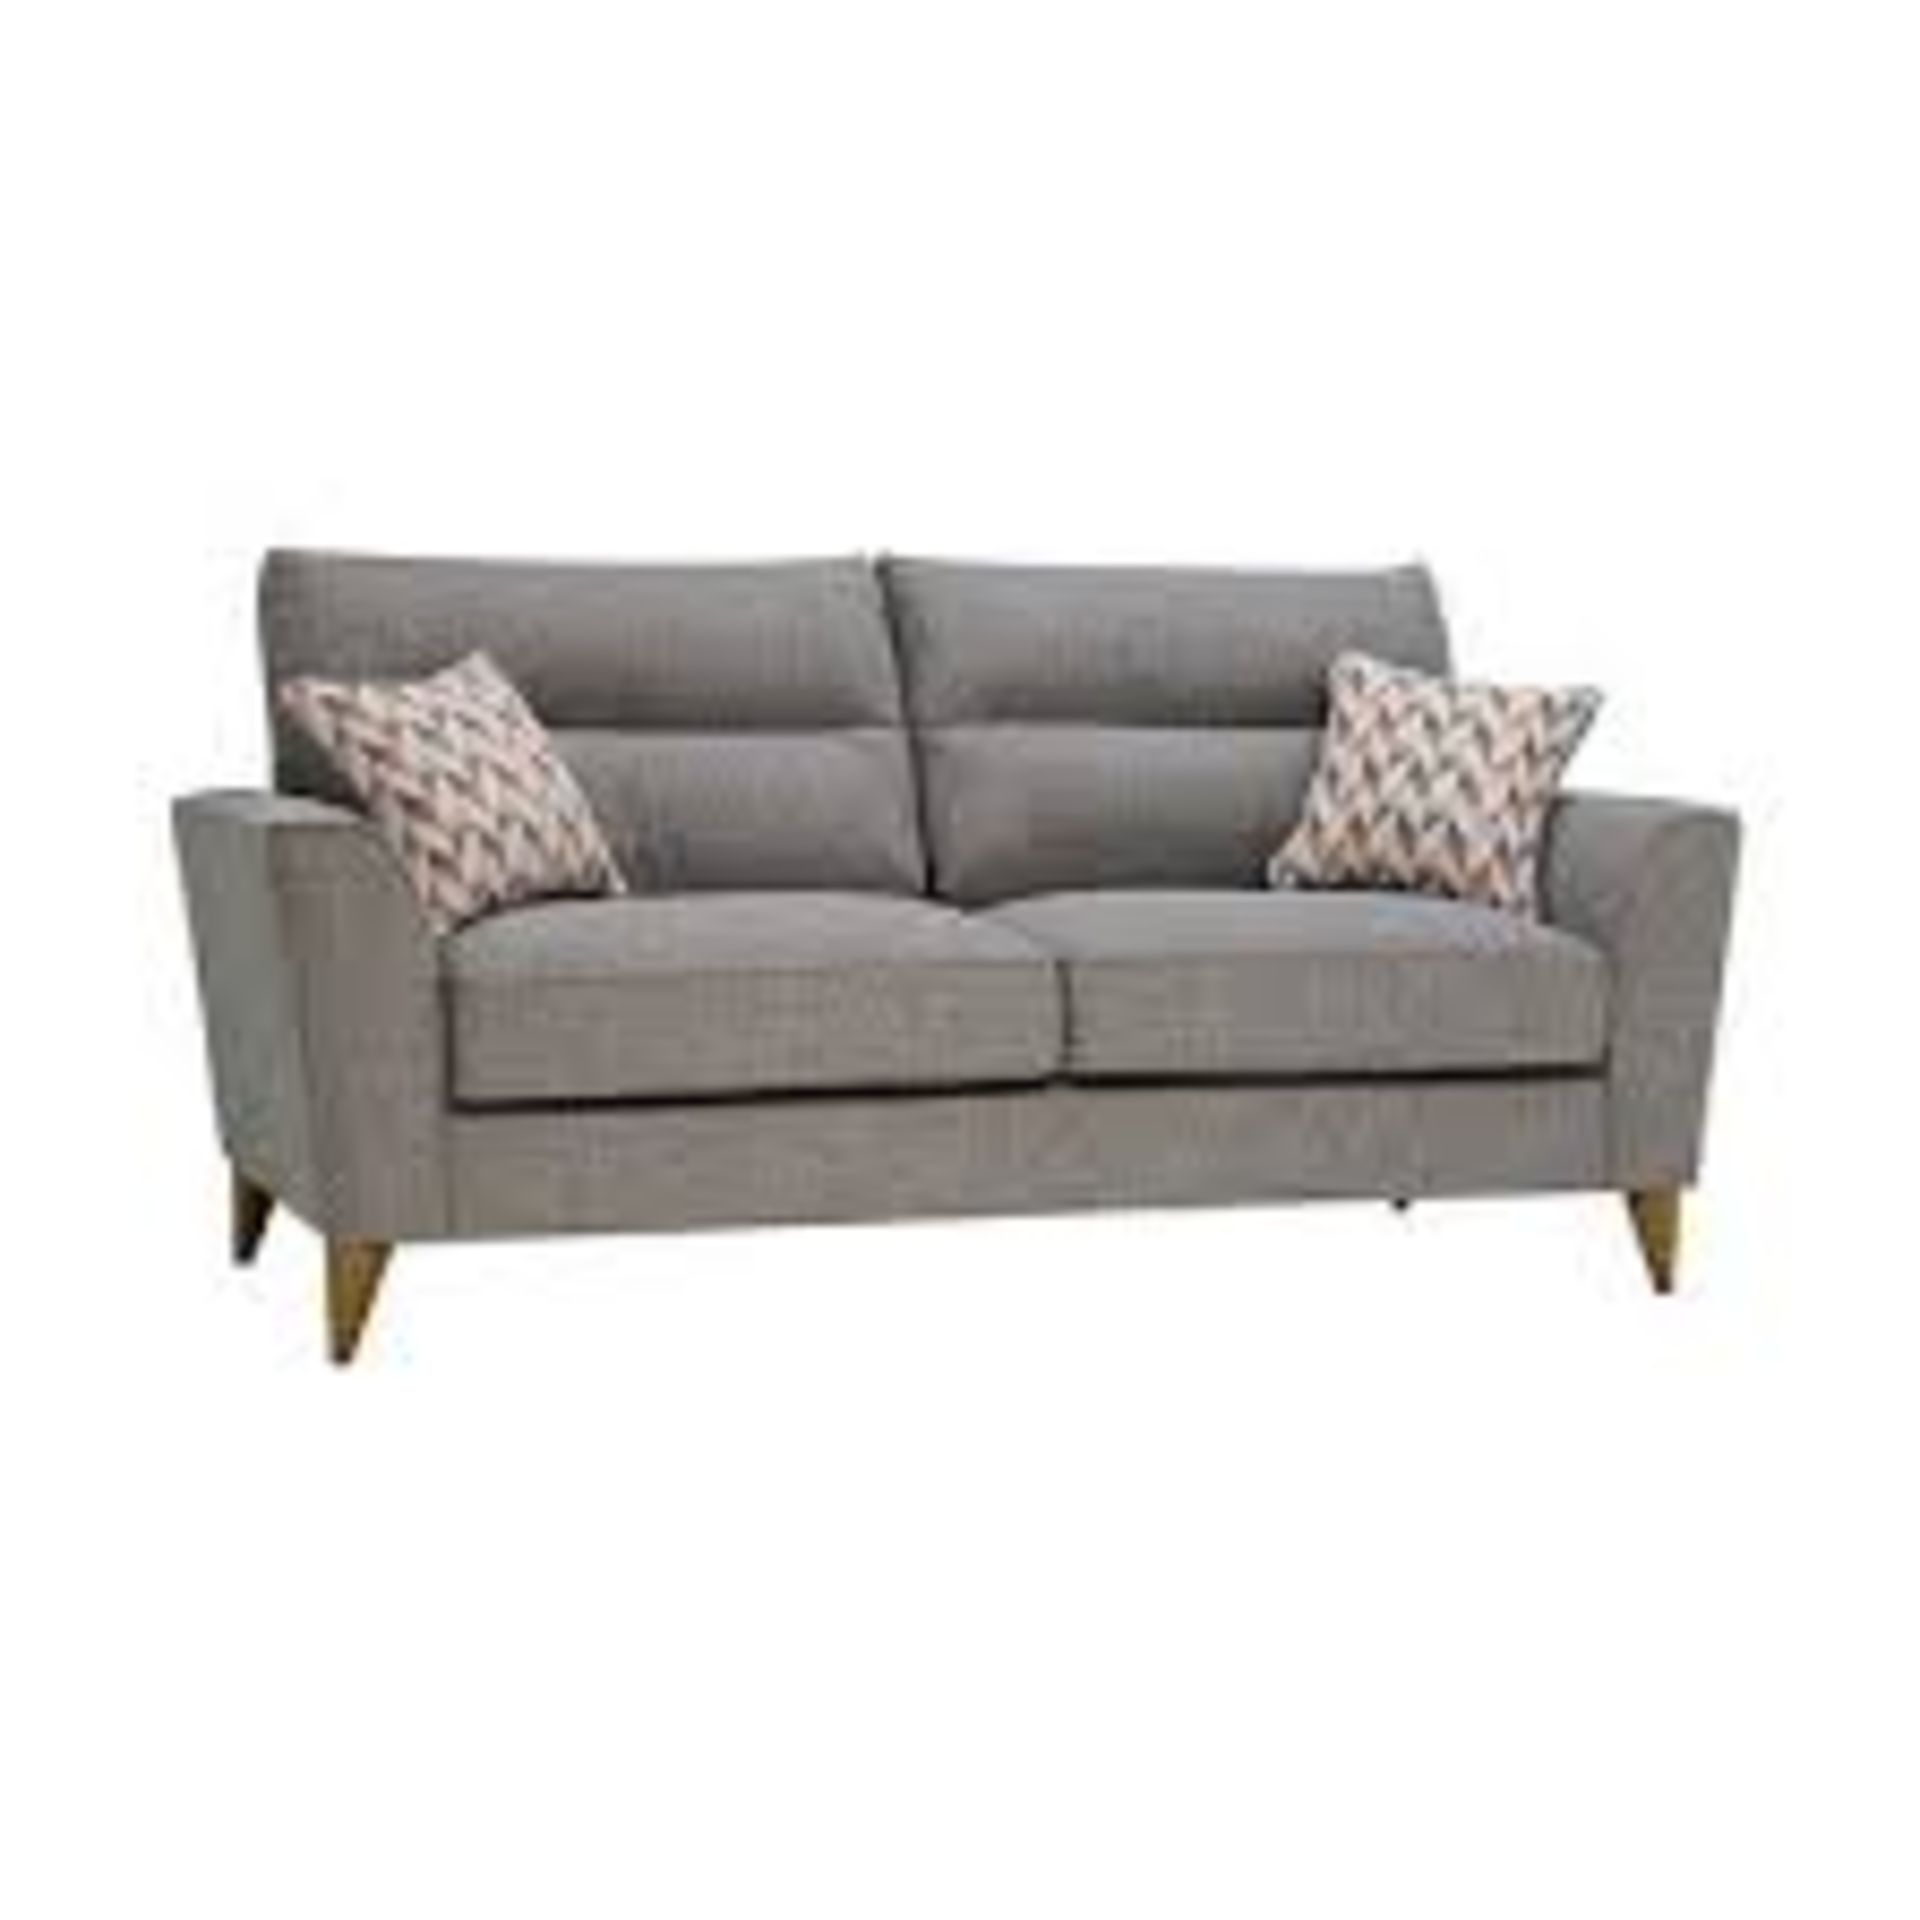 JENSEN 3 Seater Sofa | Silver with Coral Fabric. RRP £1,399.00. The Jensen sofa range is a style